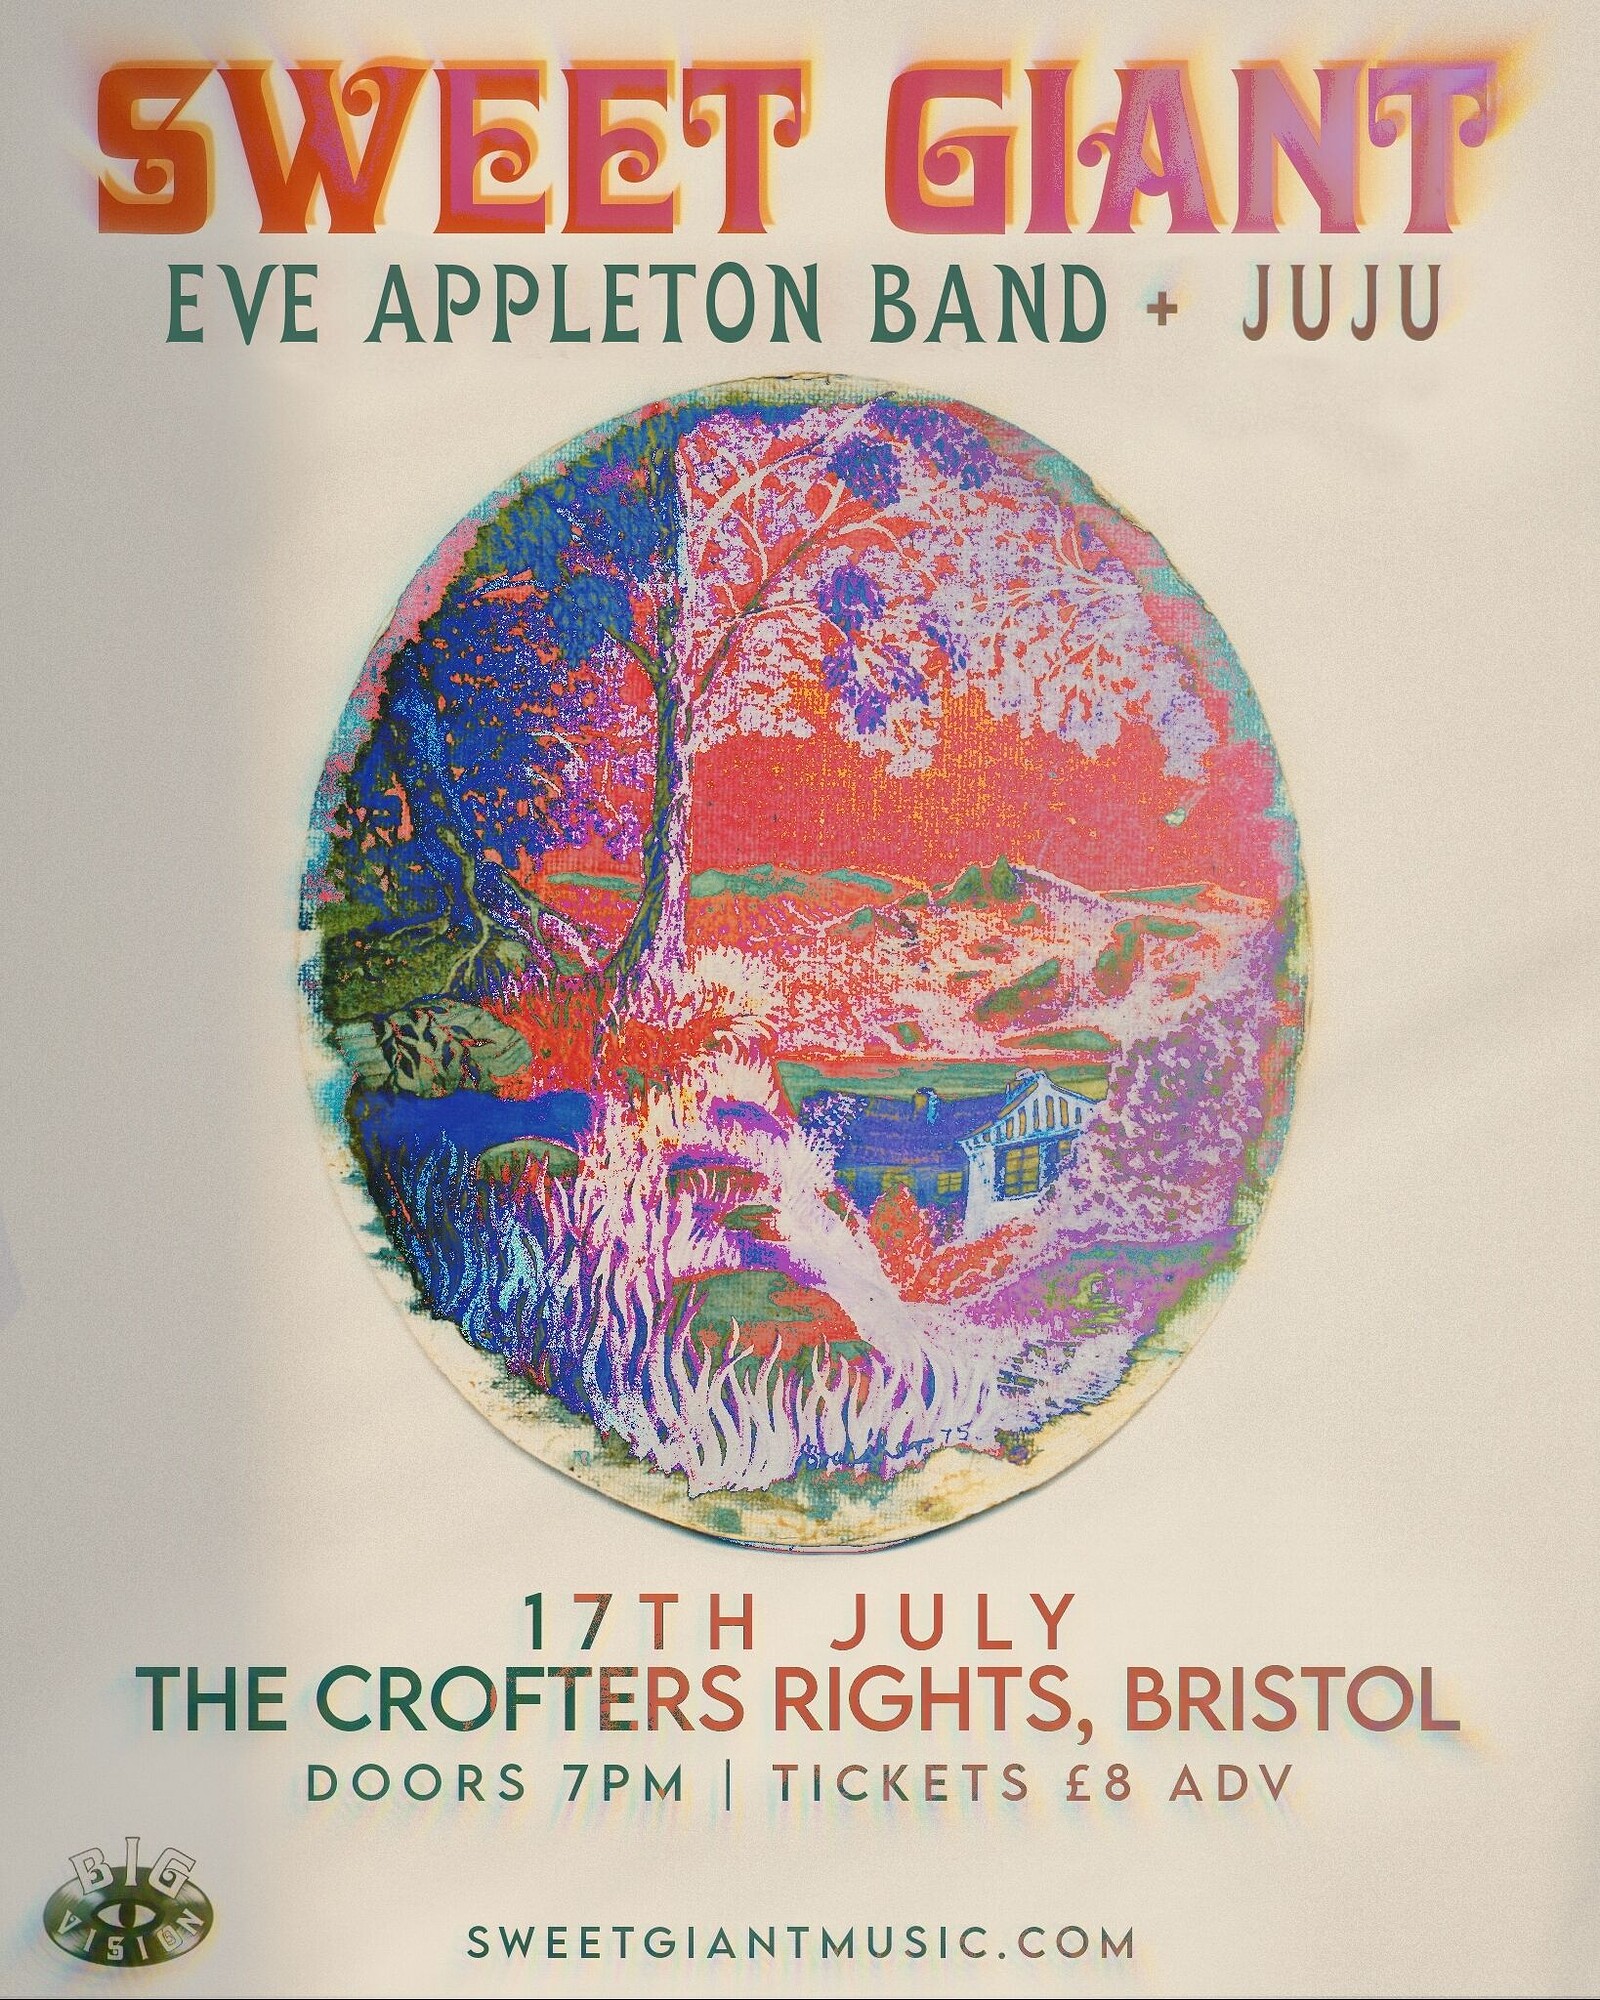 SWEET GIANT + Eve Appleton Band + Juju at Crofters Rights